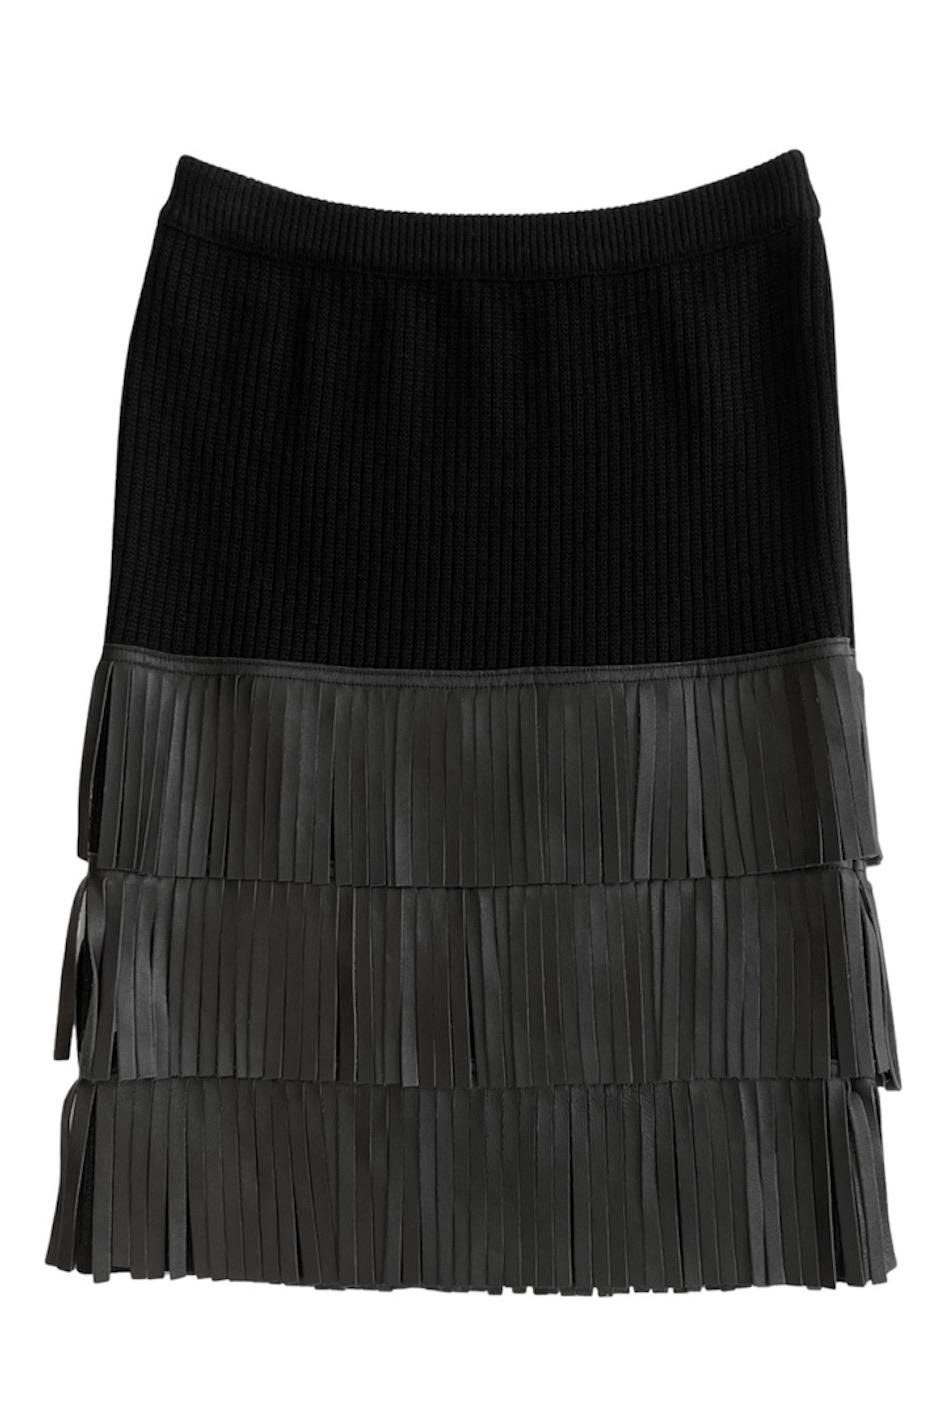 Yves Saint Laurent YSL Black Knit Scarf And Skirt With Leather Fringe In Excellent Condition For Sale In Los Angeles, CA